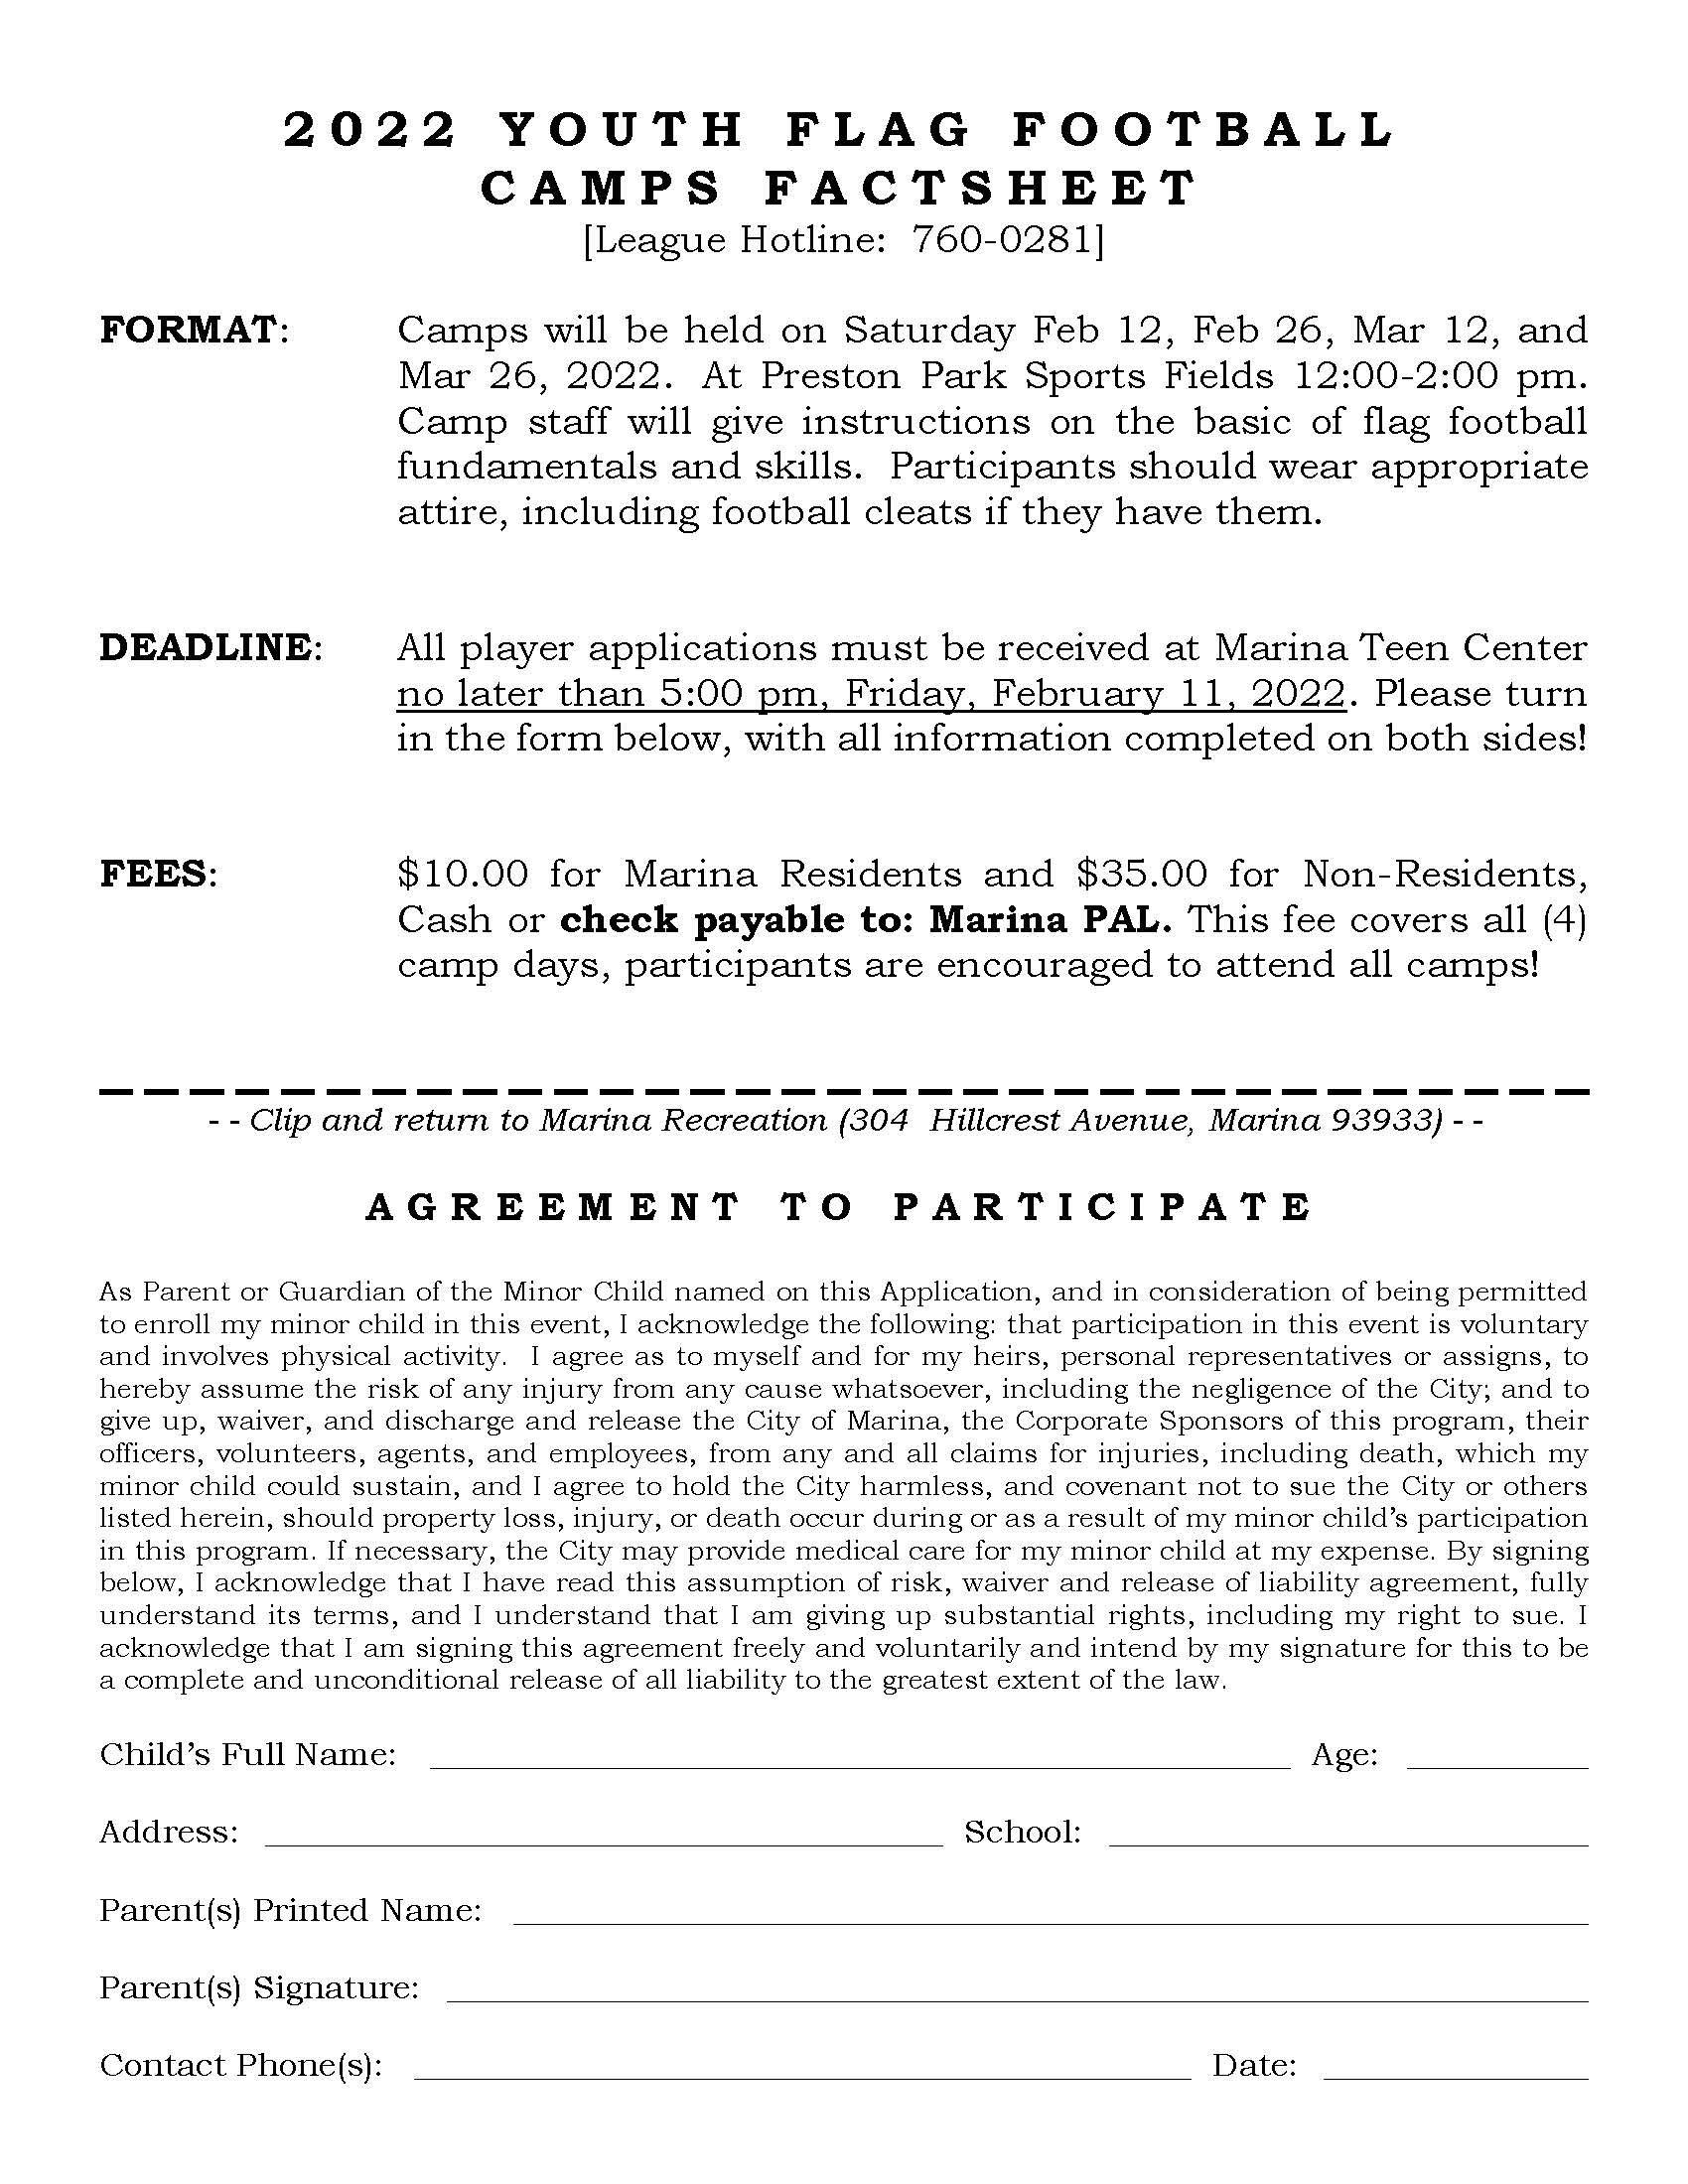 Youth Football Camps Waiver